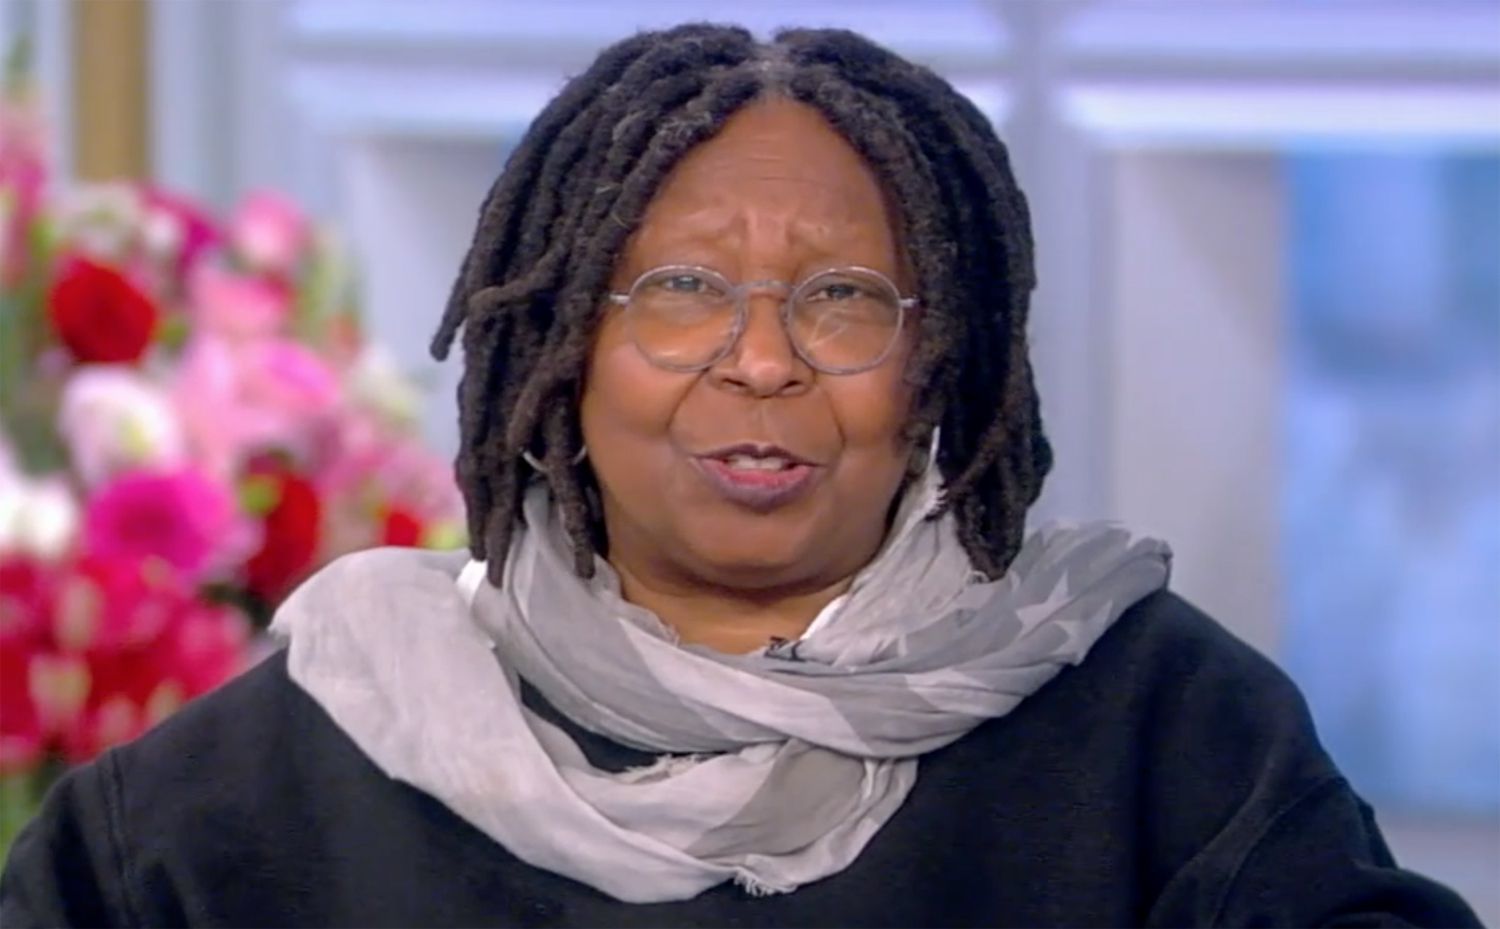 Get Well Whoopi- The View Host Is Sick With Covid